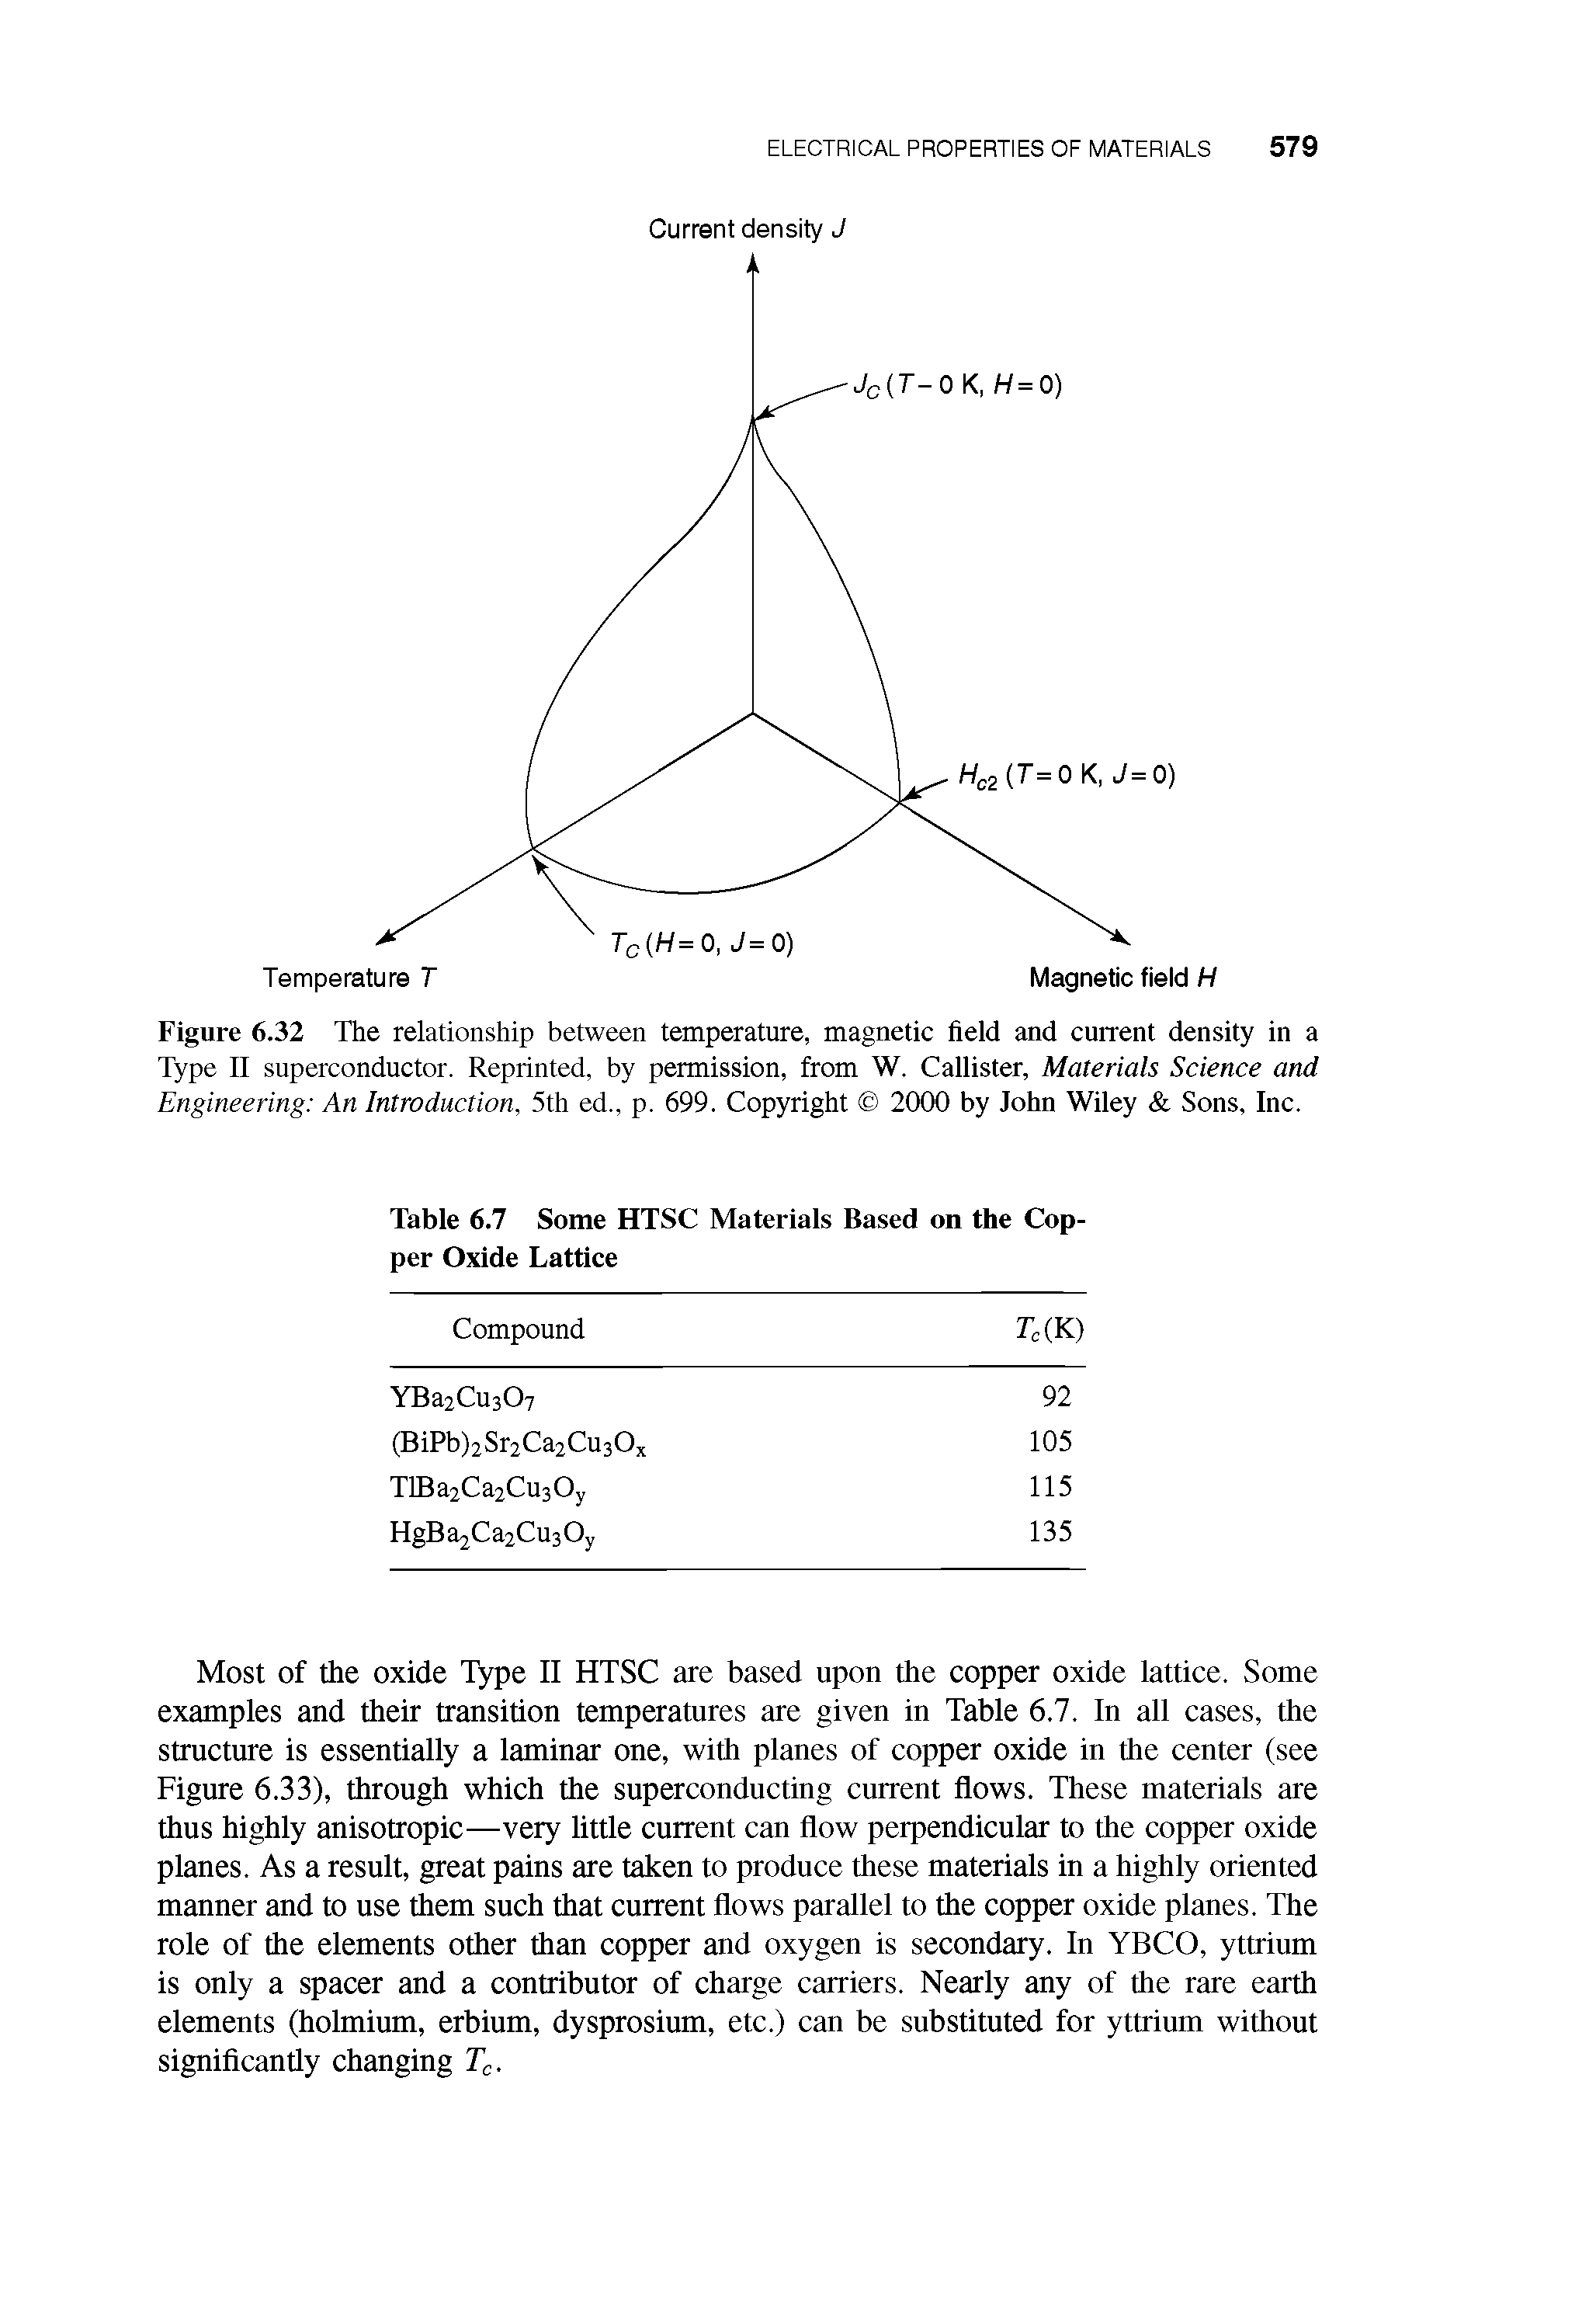 Figure 6.32 The relationship between temperature, magnetic field and current density in a Type II superconductor. Reprinted, by permission, from W. Callister, Materials Science and Engineering An Introduction, 5th ed., p. 699. Copyright 2000 by John Wiley Sons, Inc.